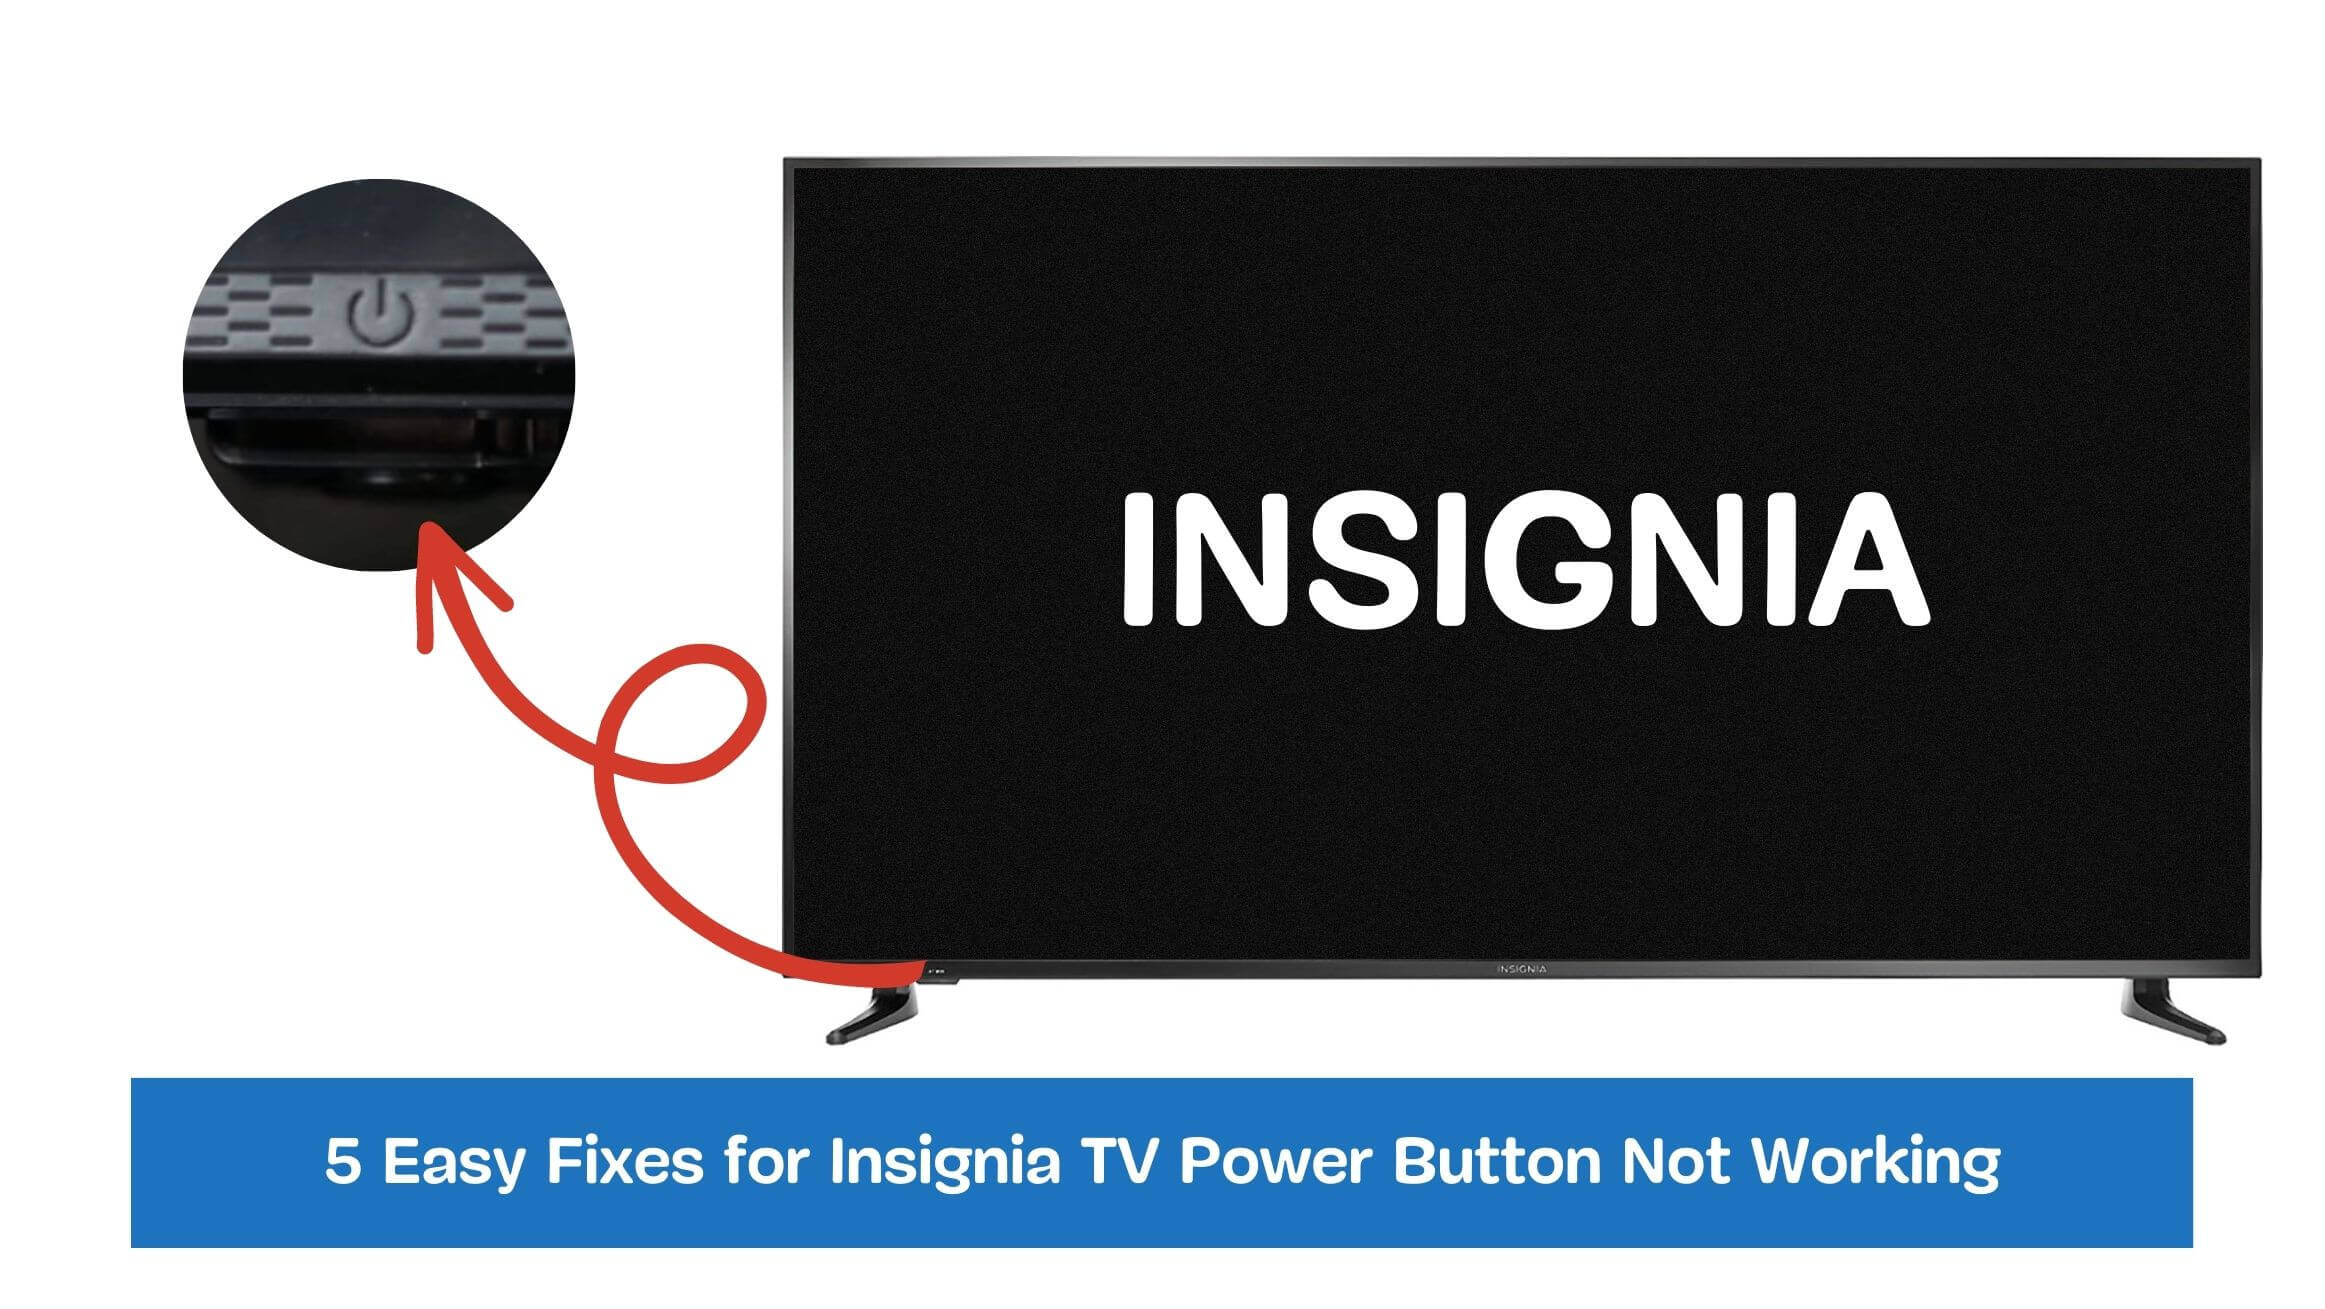 5 Easy Fixes for Insignia TV Power Button Not Working